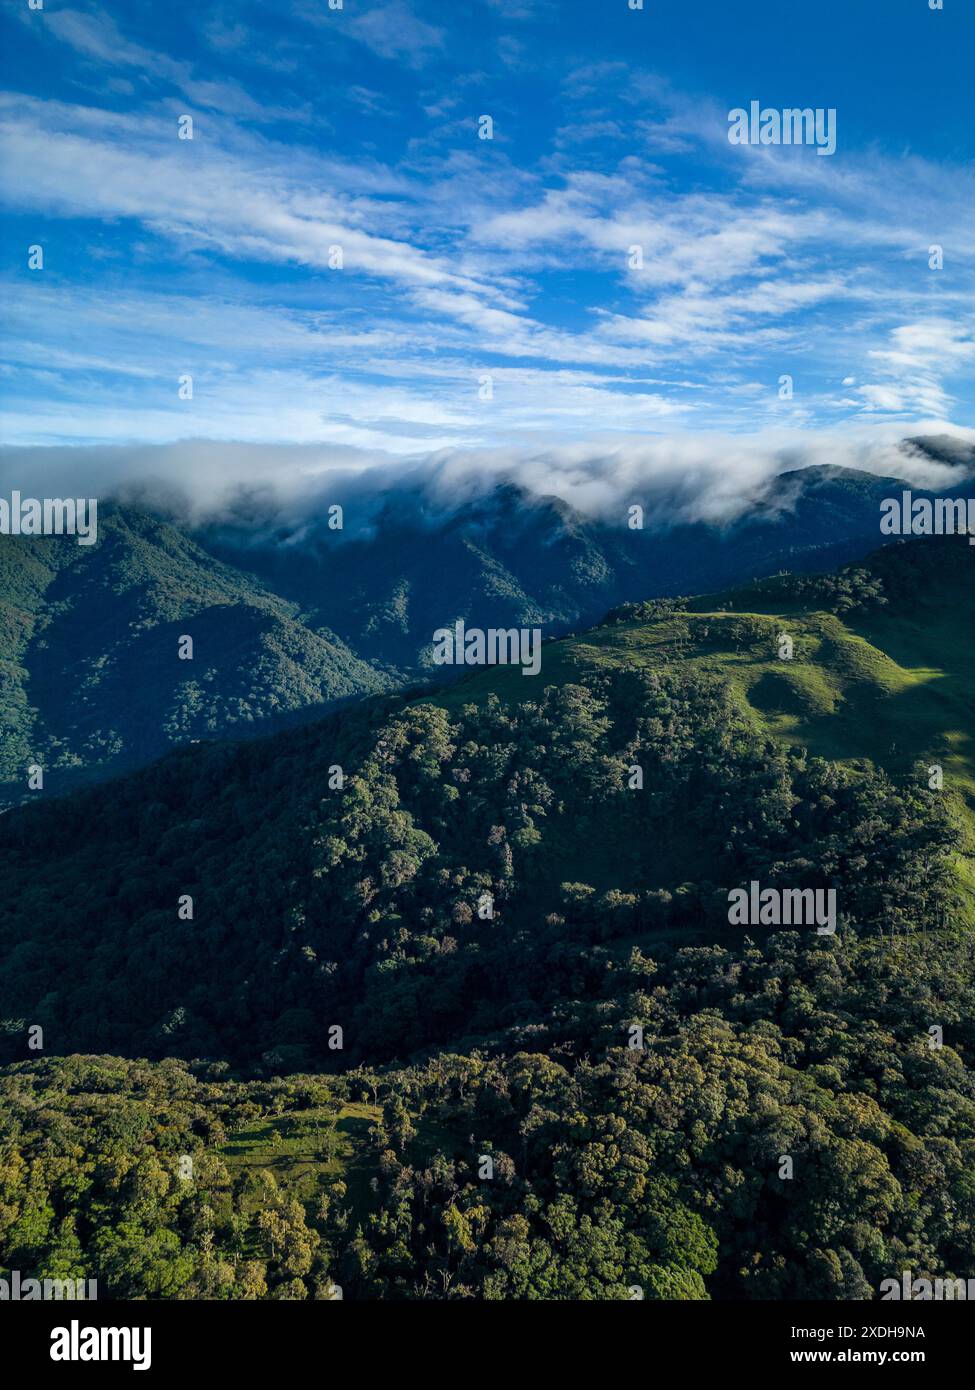 Misty cloud forest in the foothills of the Chiriqui highlands in Baru volcano, Panama, Central America - stock photo Stock Photo